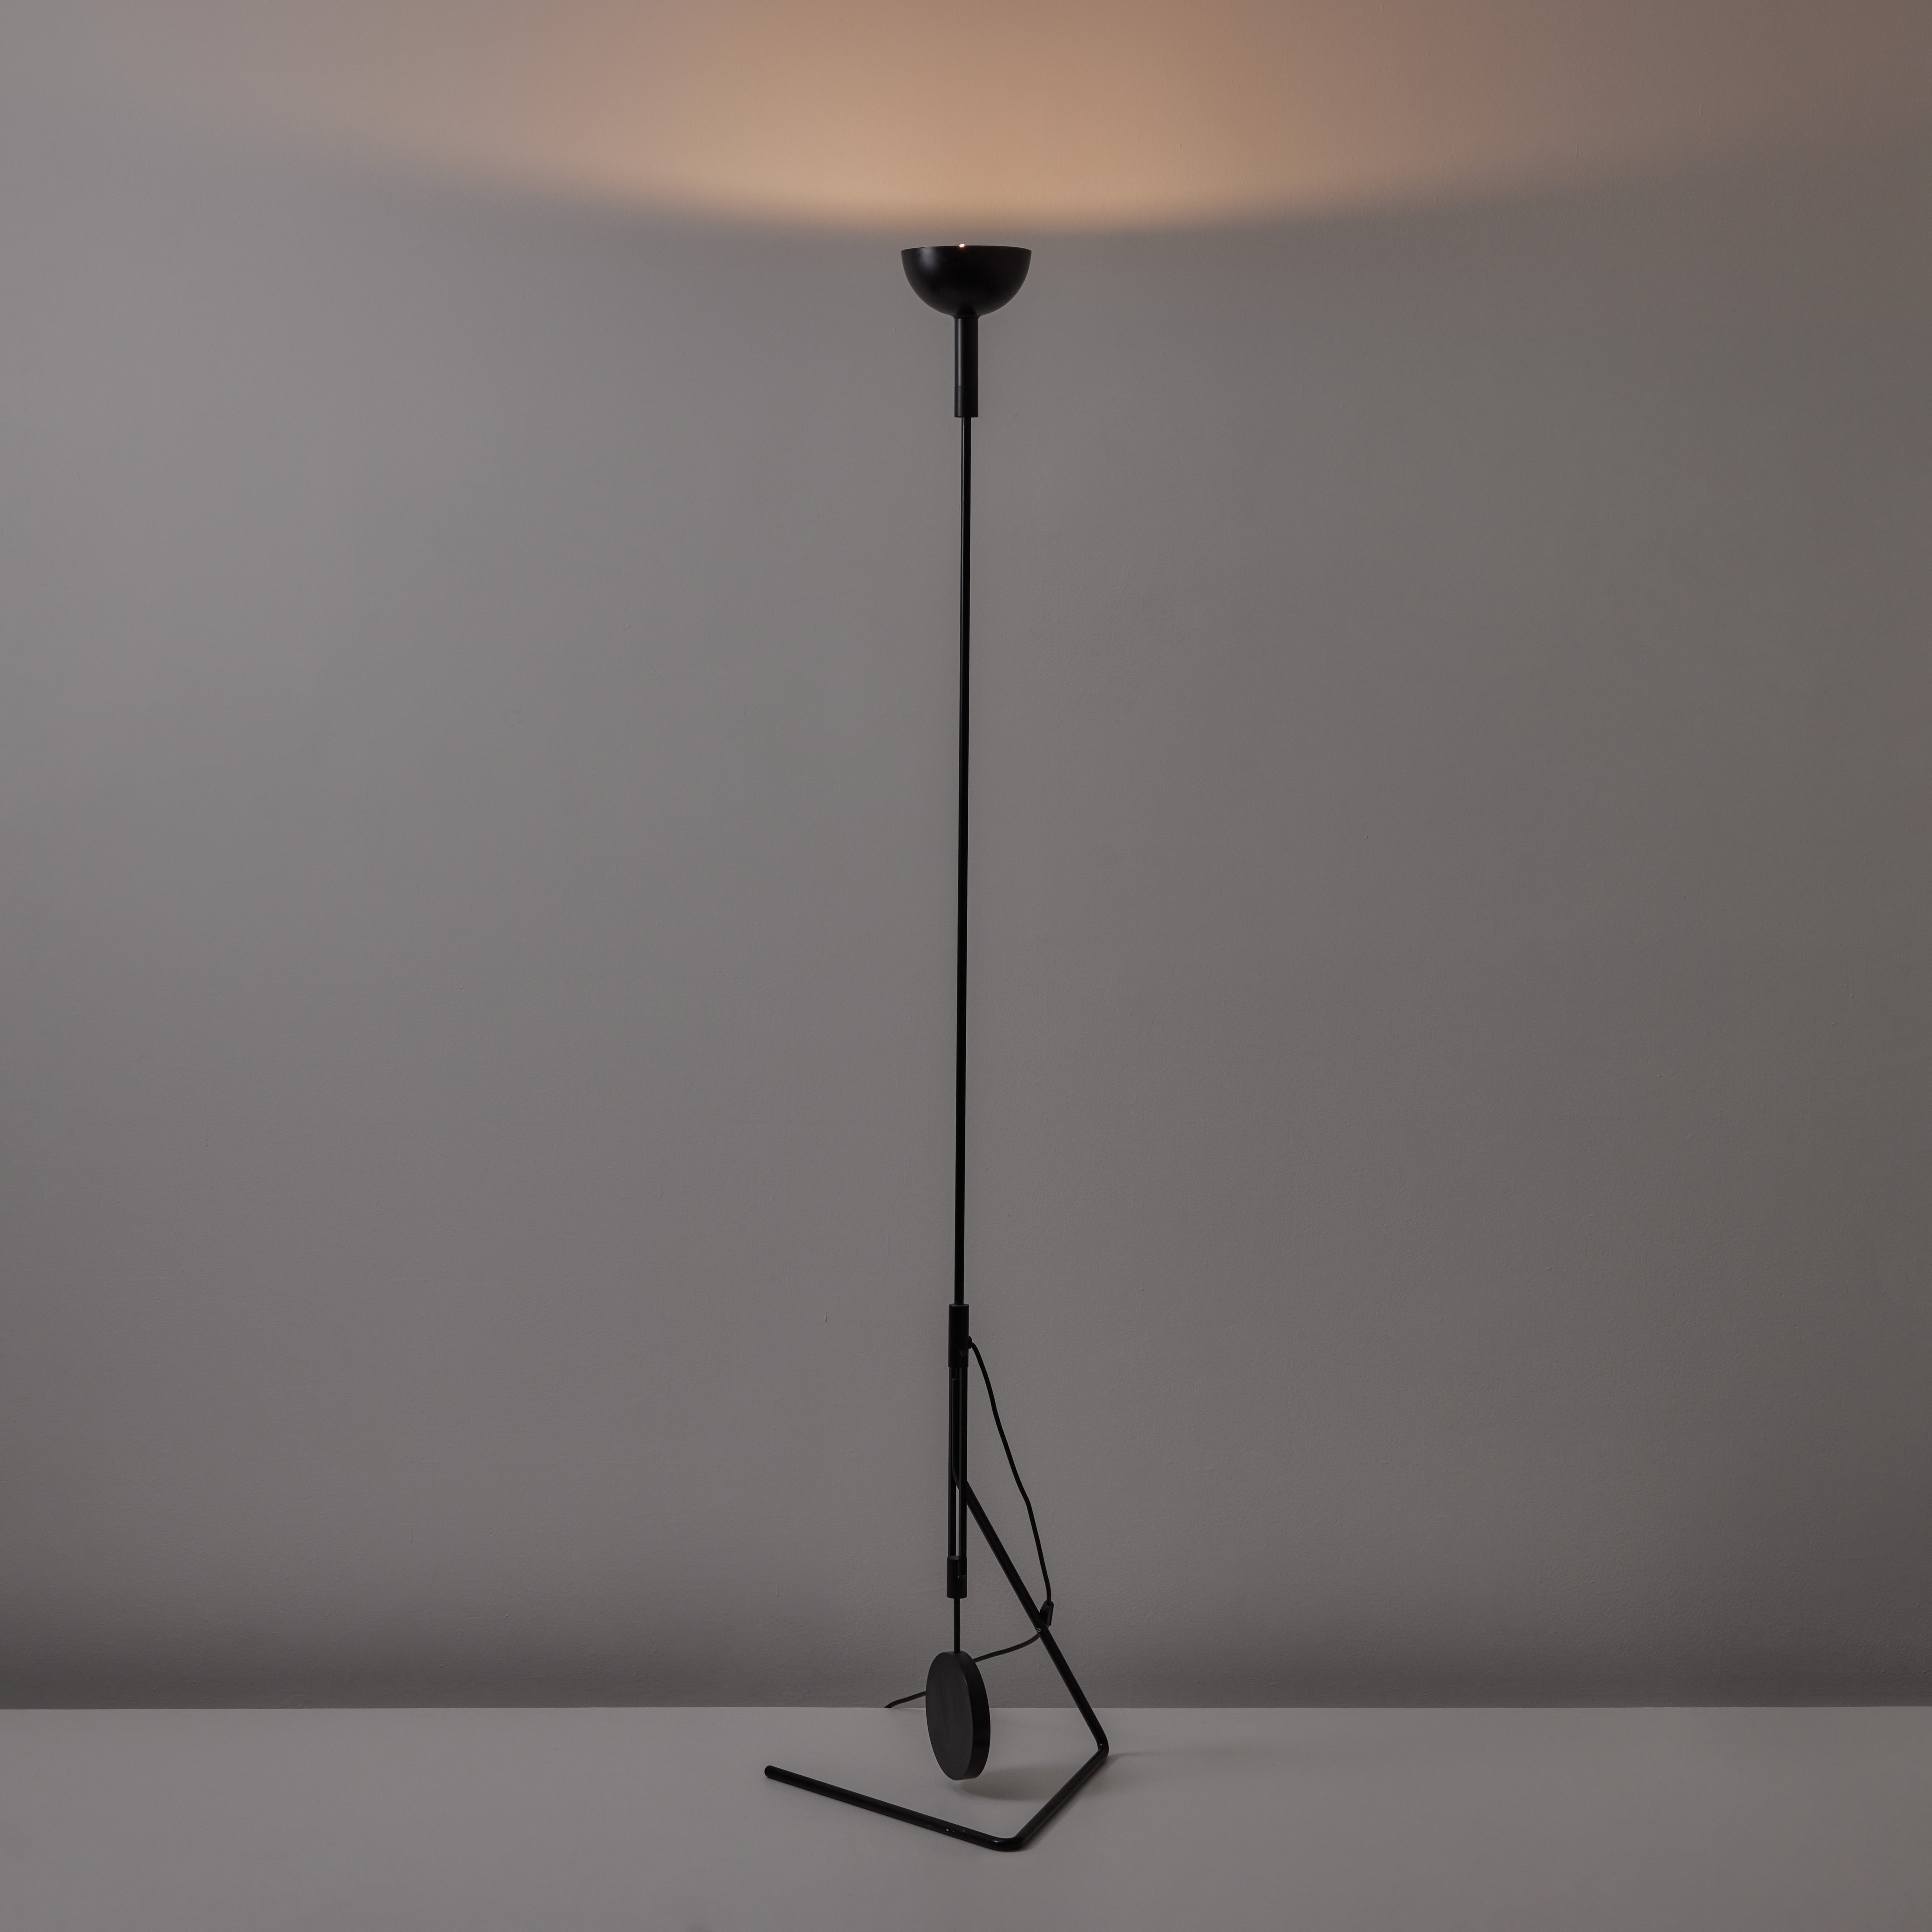 Floor Lamp by Martinelli Elio for Martinelli Luce. Designed in Italy, circa the 1970s. A slender all black uplight floor lamp. The light comes in two parts; one is the upper shade and hald body of the stem which rests on the bottom half by a